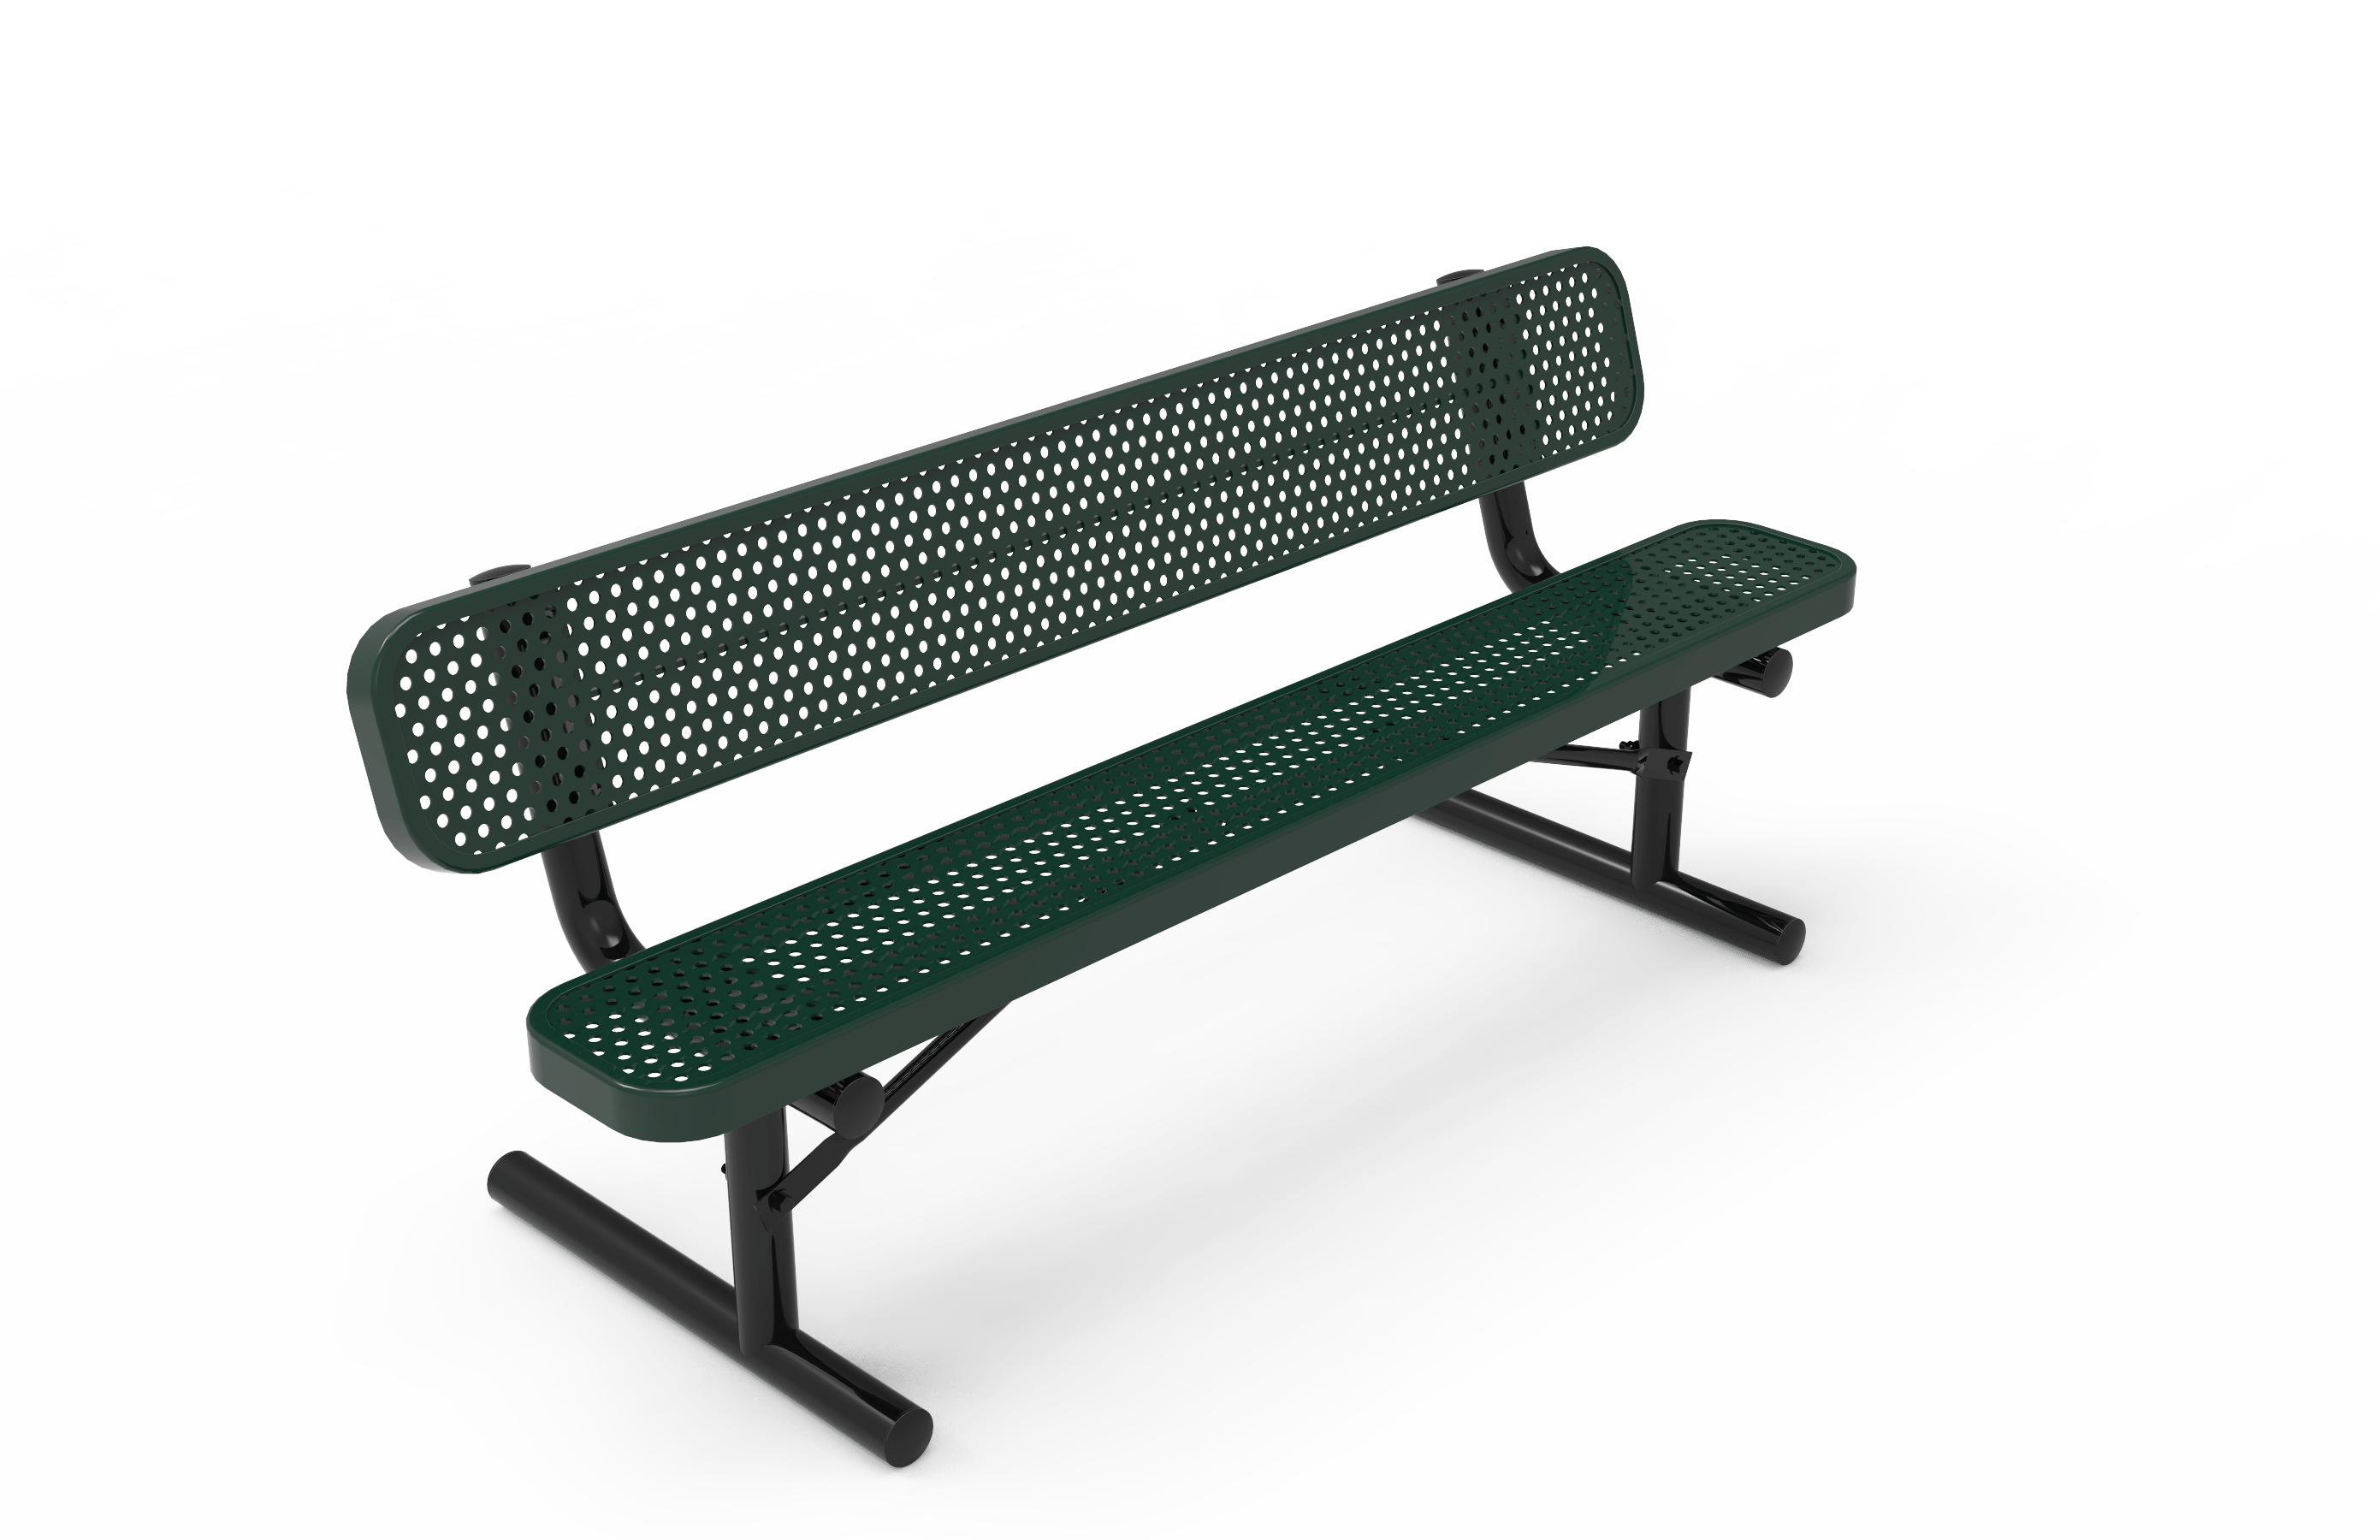 8′ Standard Bench With Back-Punched
BRT08-D-18-000
Industry Standard Finish
$669.00
BRT08-B-18-000
Advantage Premium Finish
$819.00
